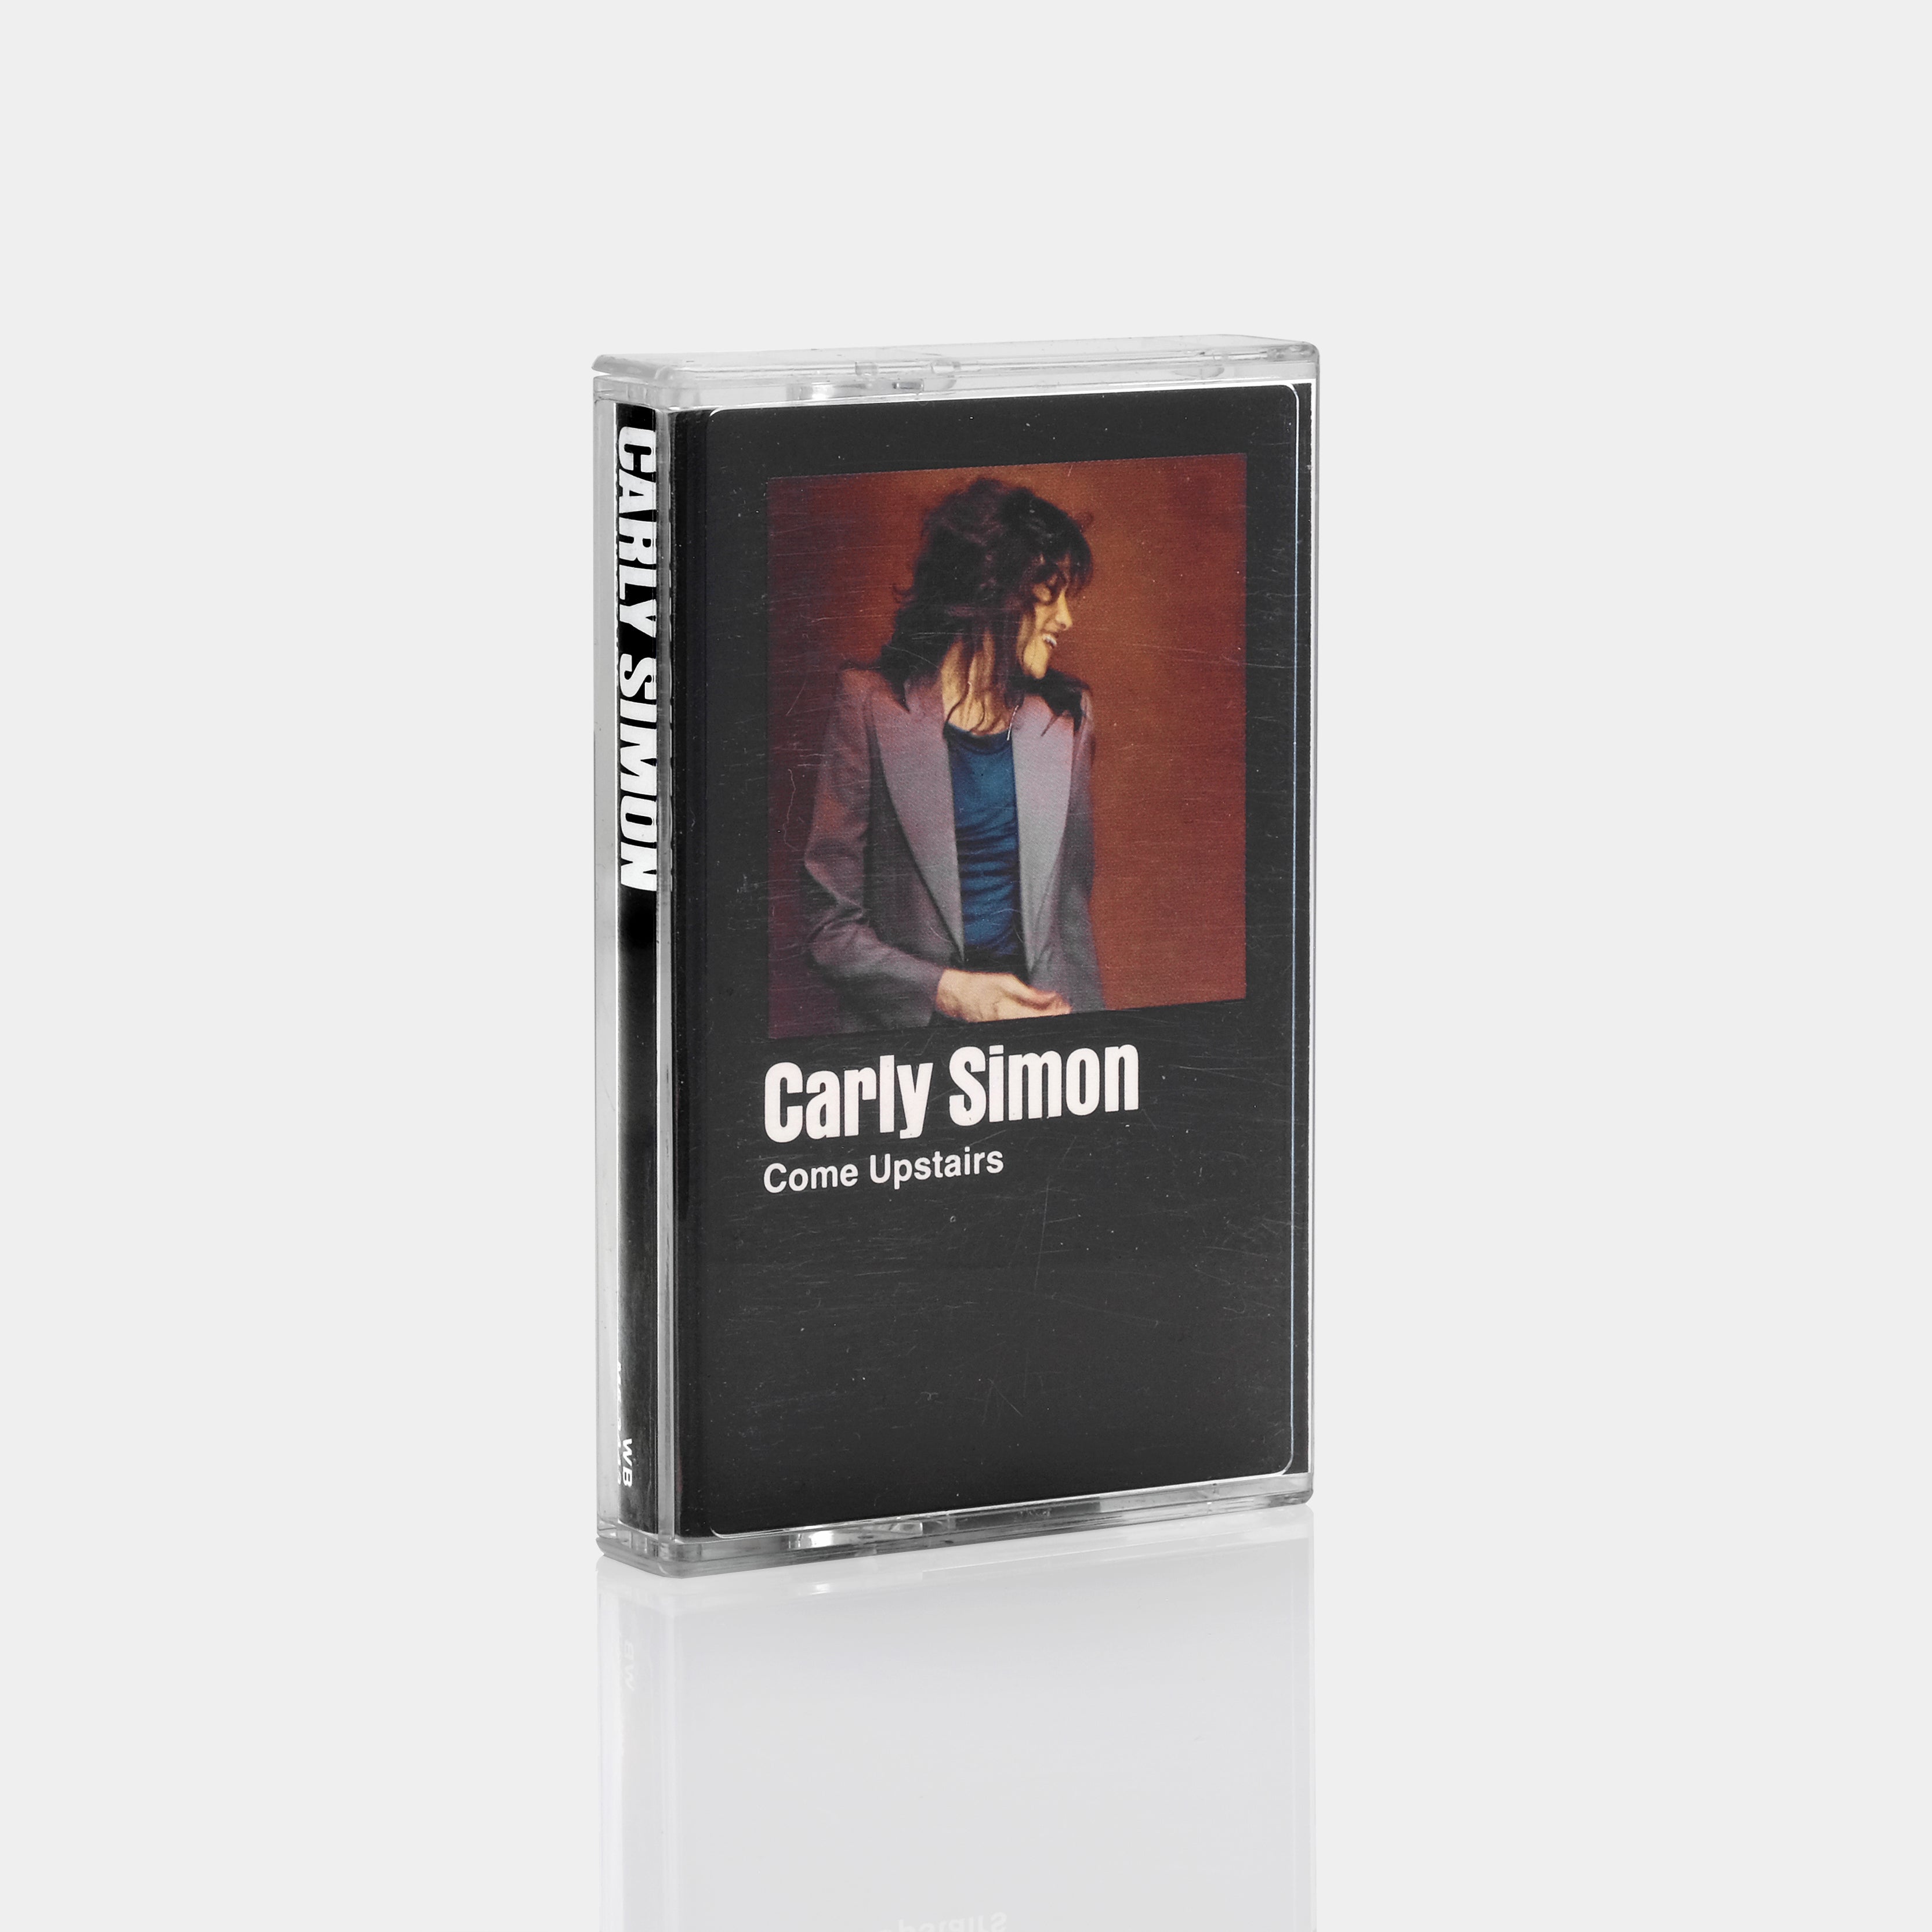 Carly Simon - Come Upstairs Cassette Tape